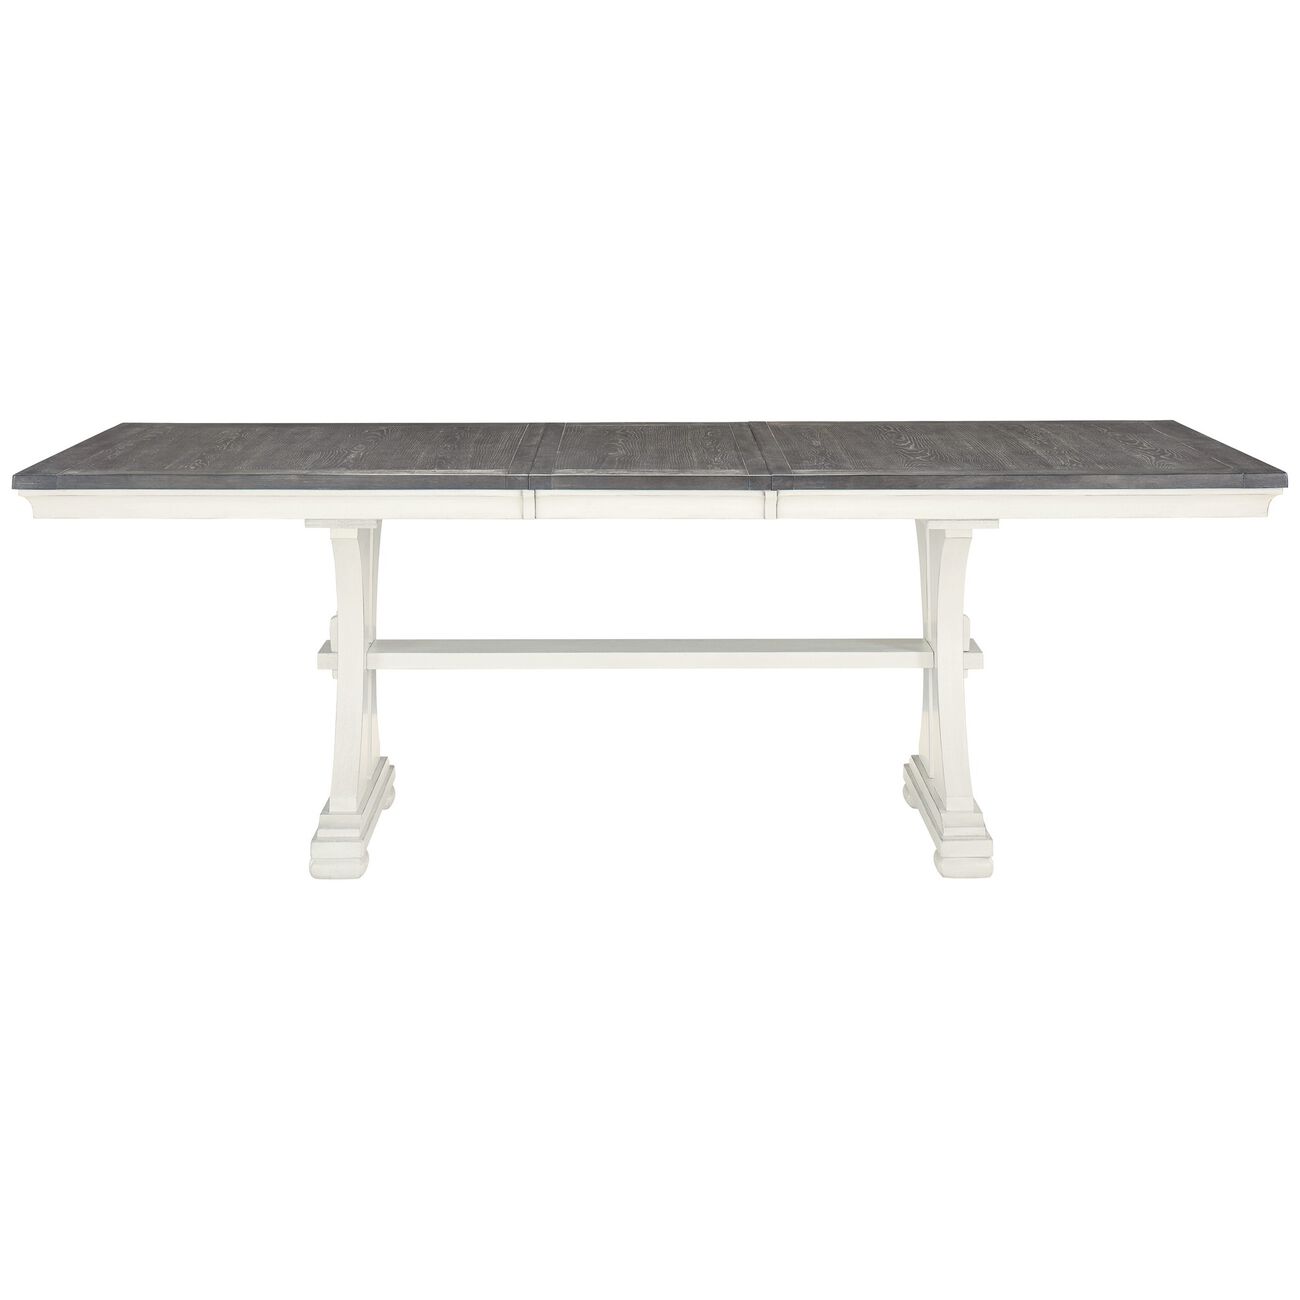 Rectangular Extendable Dining Table with Trestle Base, Brown and White